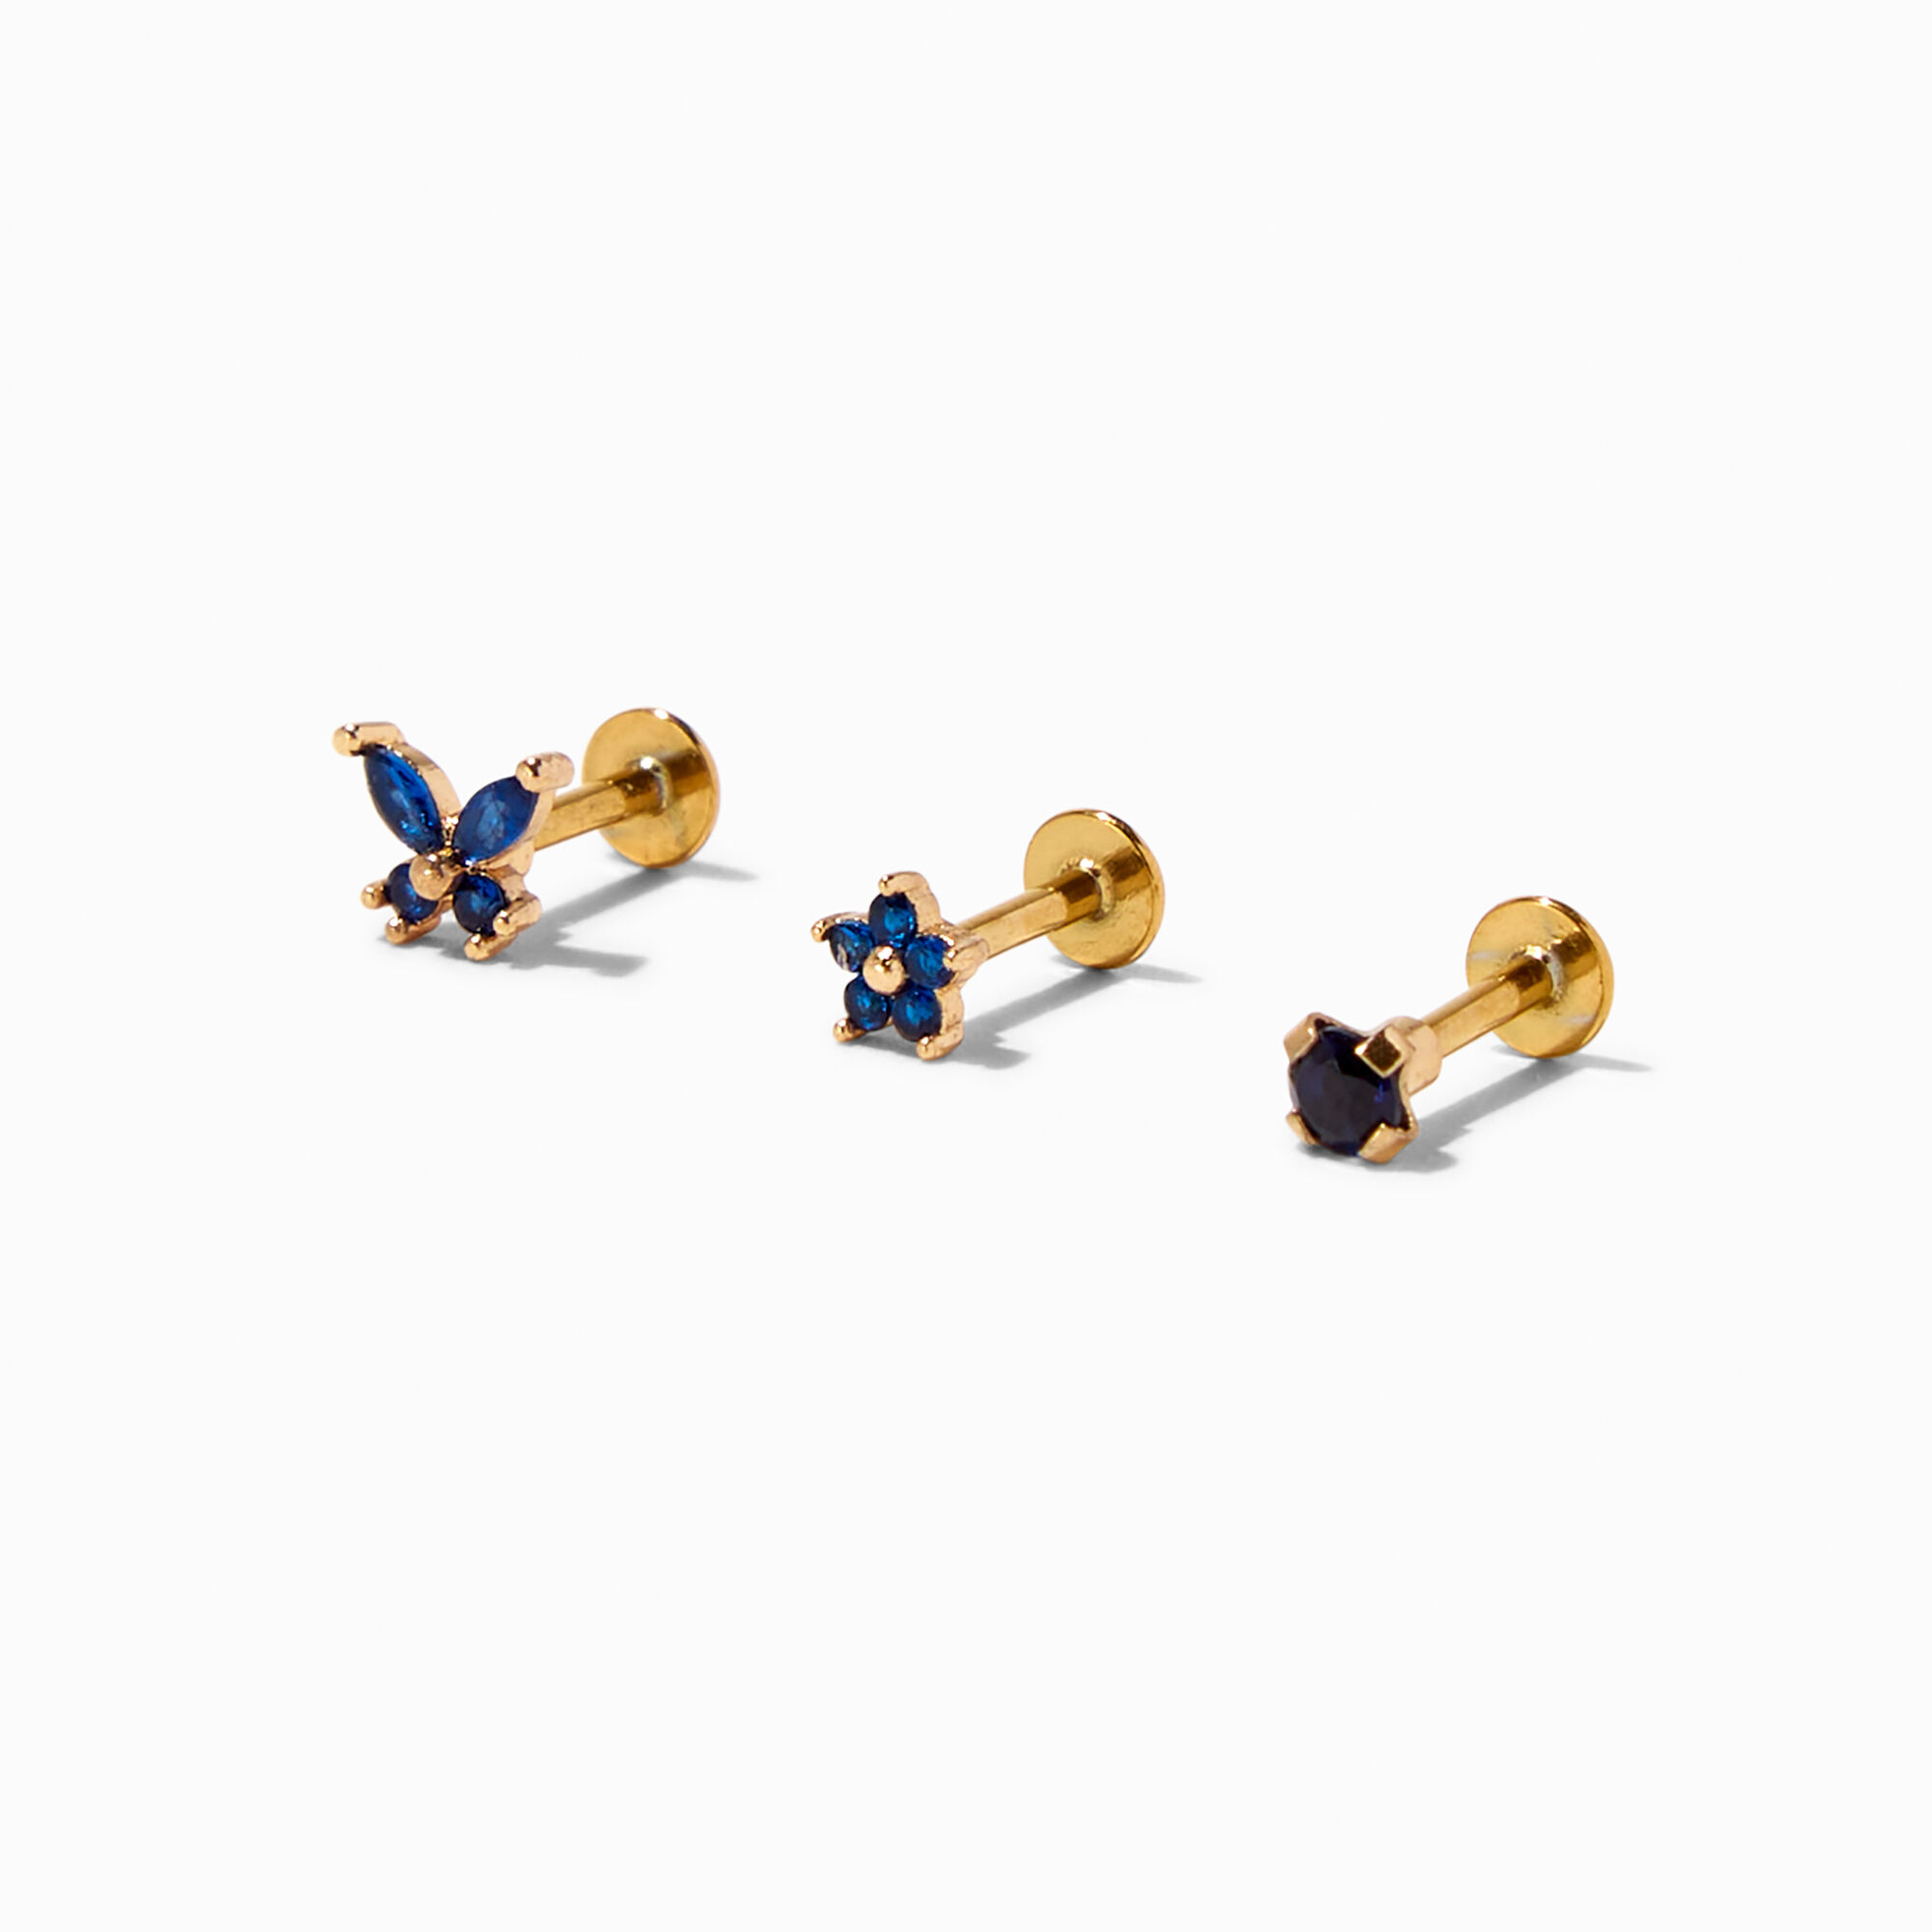 View Claires GoldTone 16G Butterfly Flower Cartilage Earrings 3 Pack Blue information